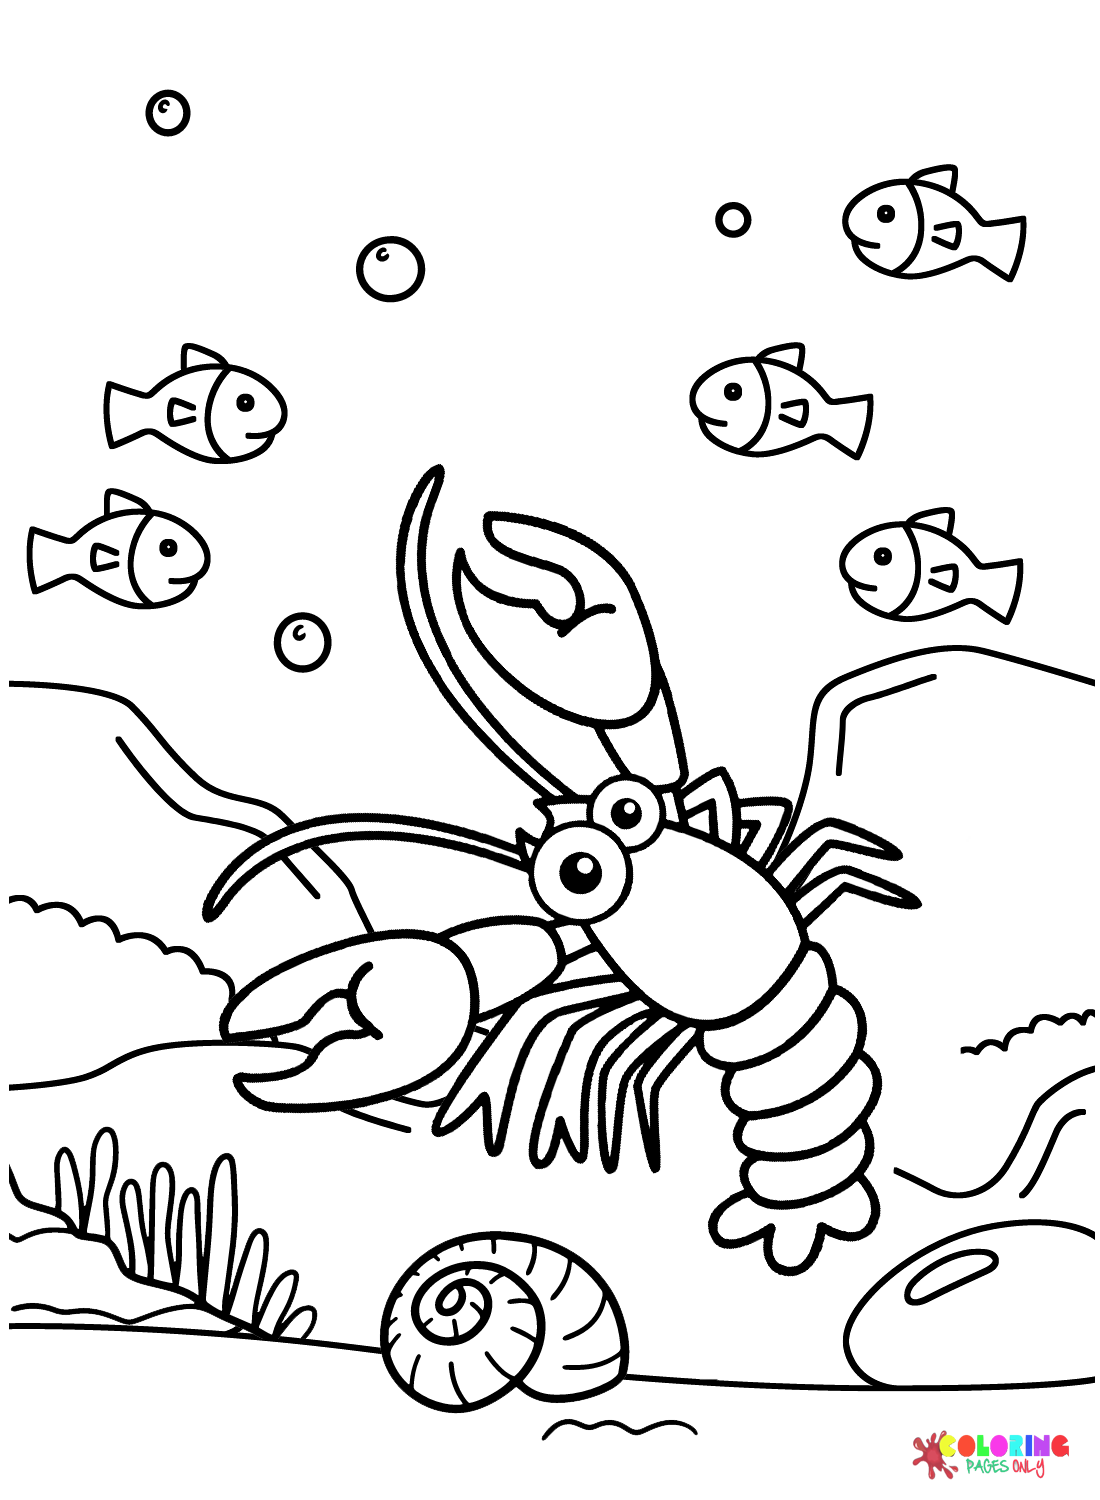 Lobster under the Sea Coloring Page